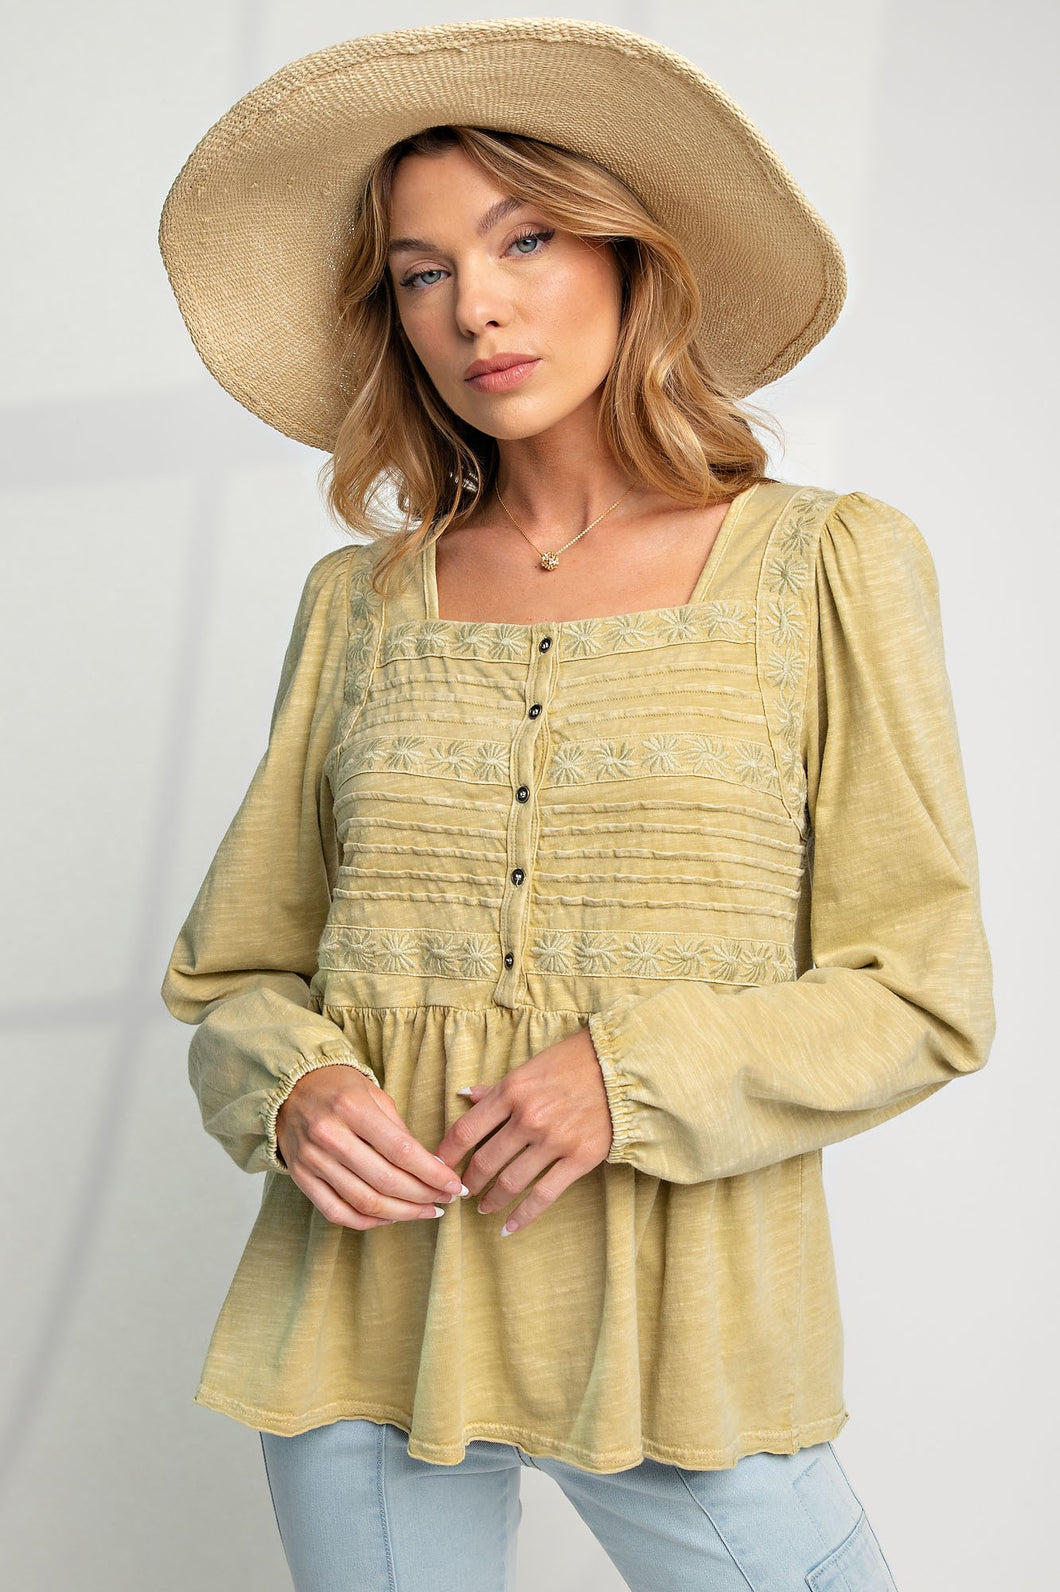 Easel Embroidered Babydoll Top in Avocado Shirts & Tops Easel   